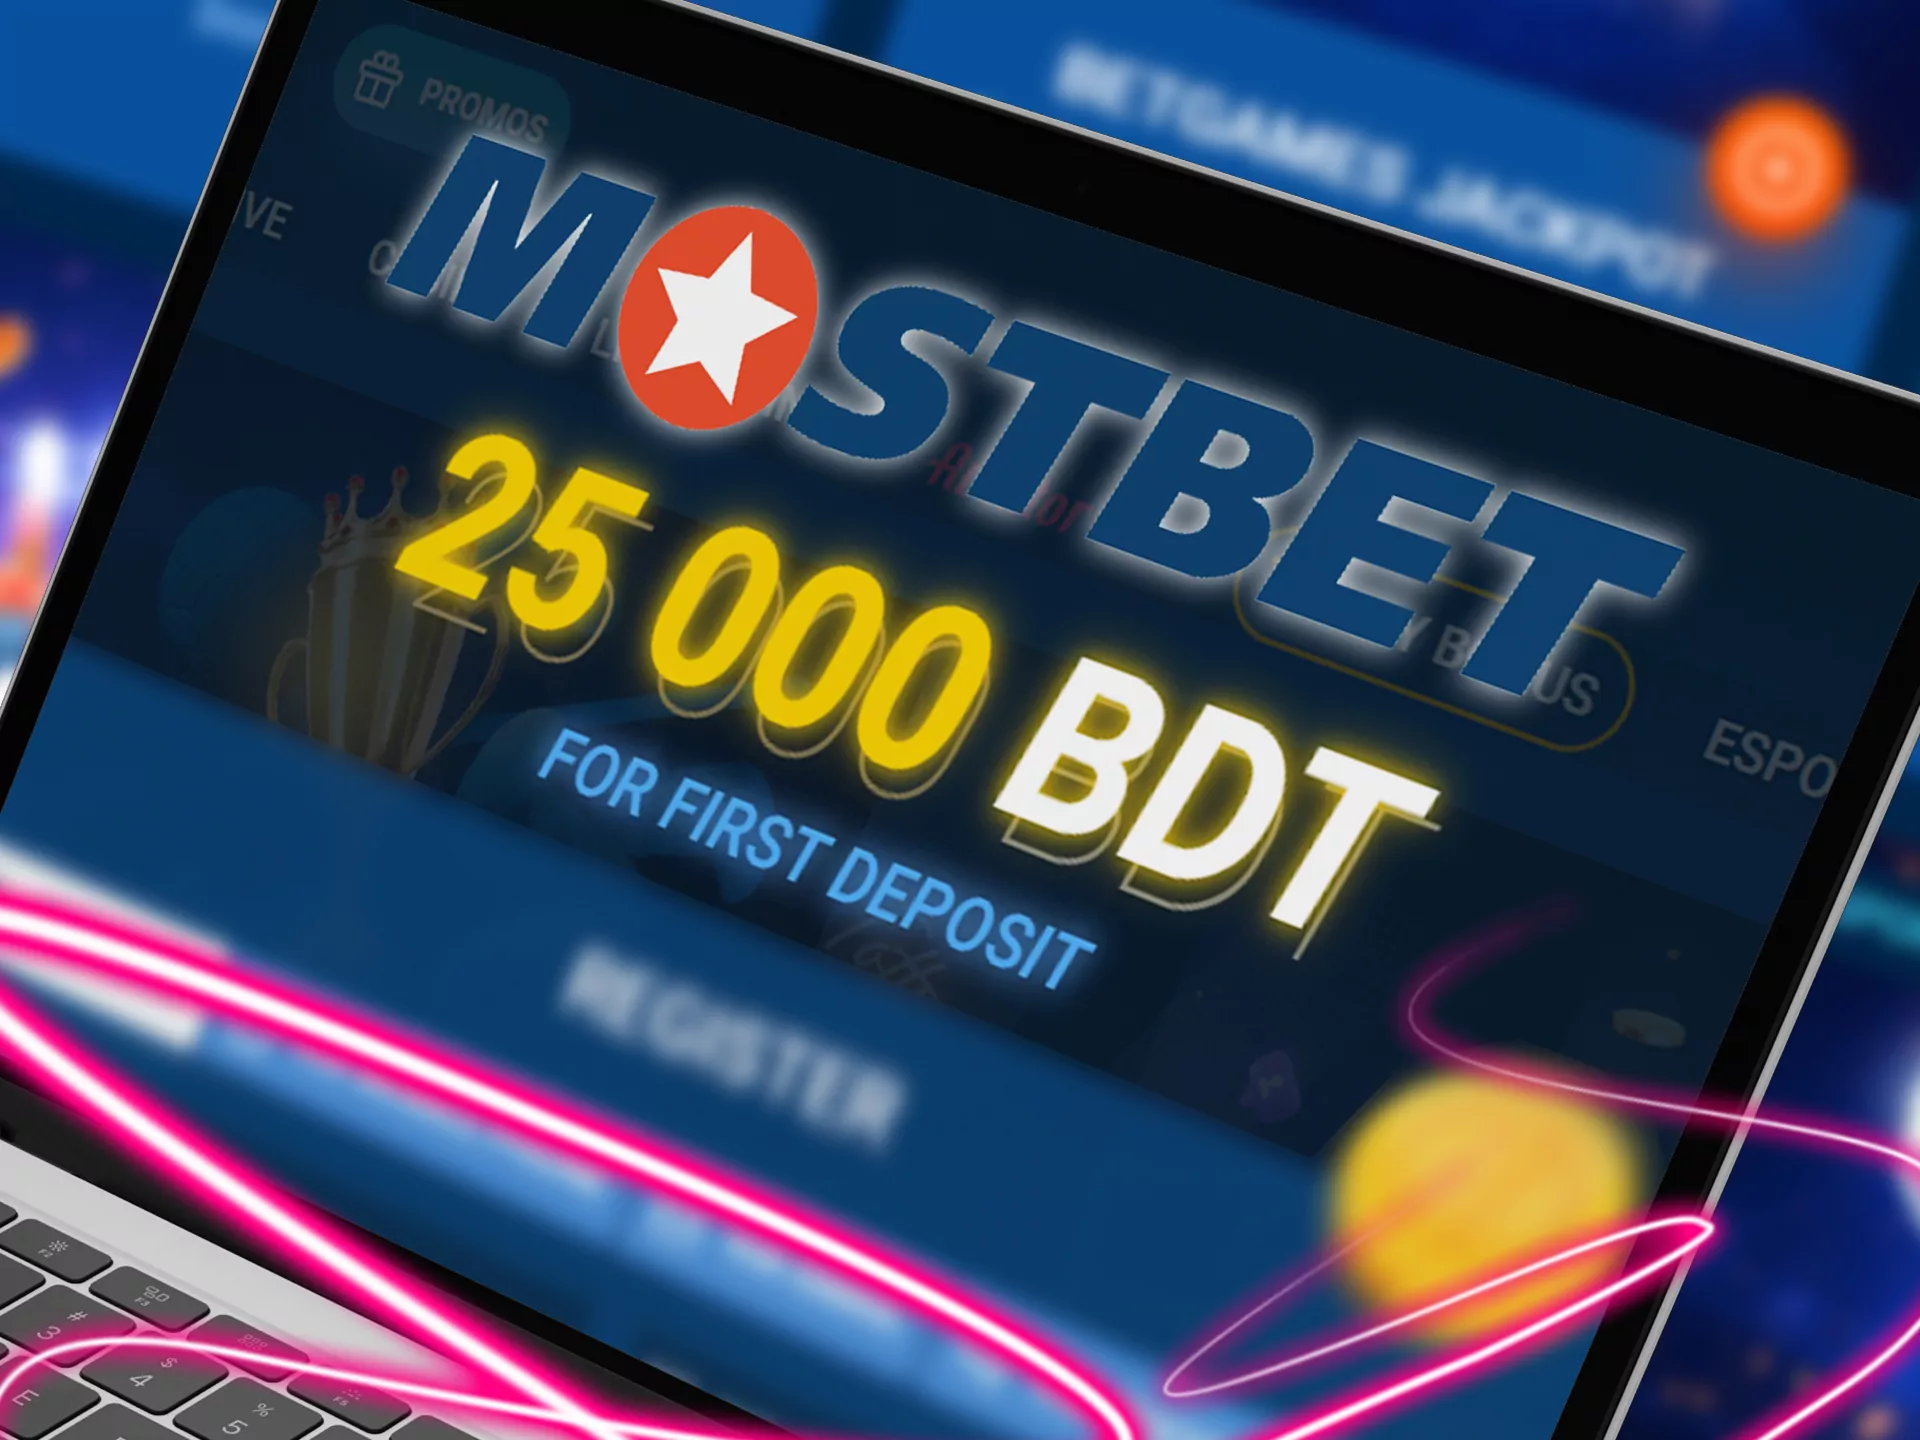 Get free money after first deposit at Mostbet.